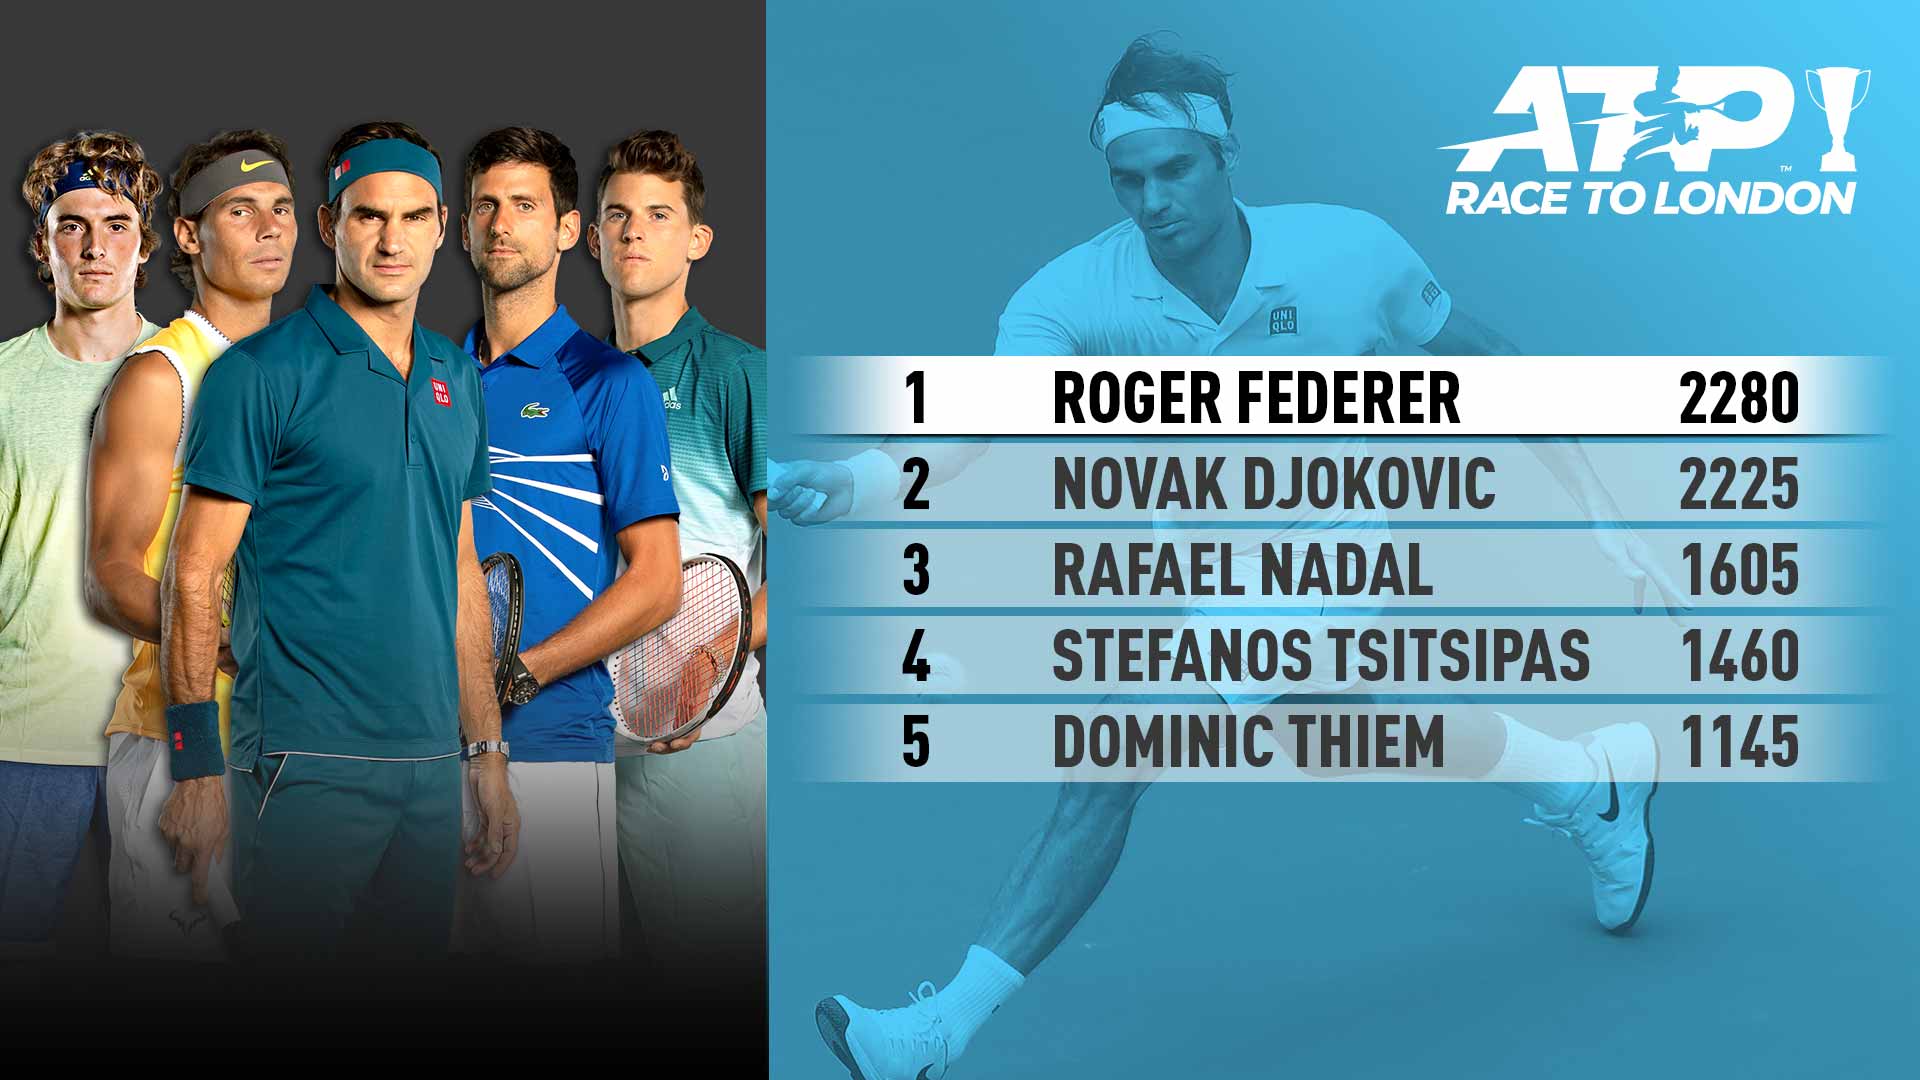 Roger Federer leads the ATP Race To London following the Miami Open presented by Itau for the third straight year.